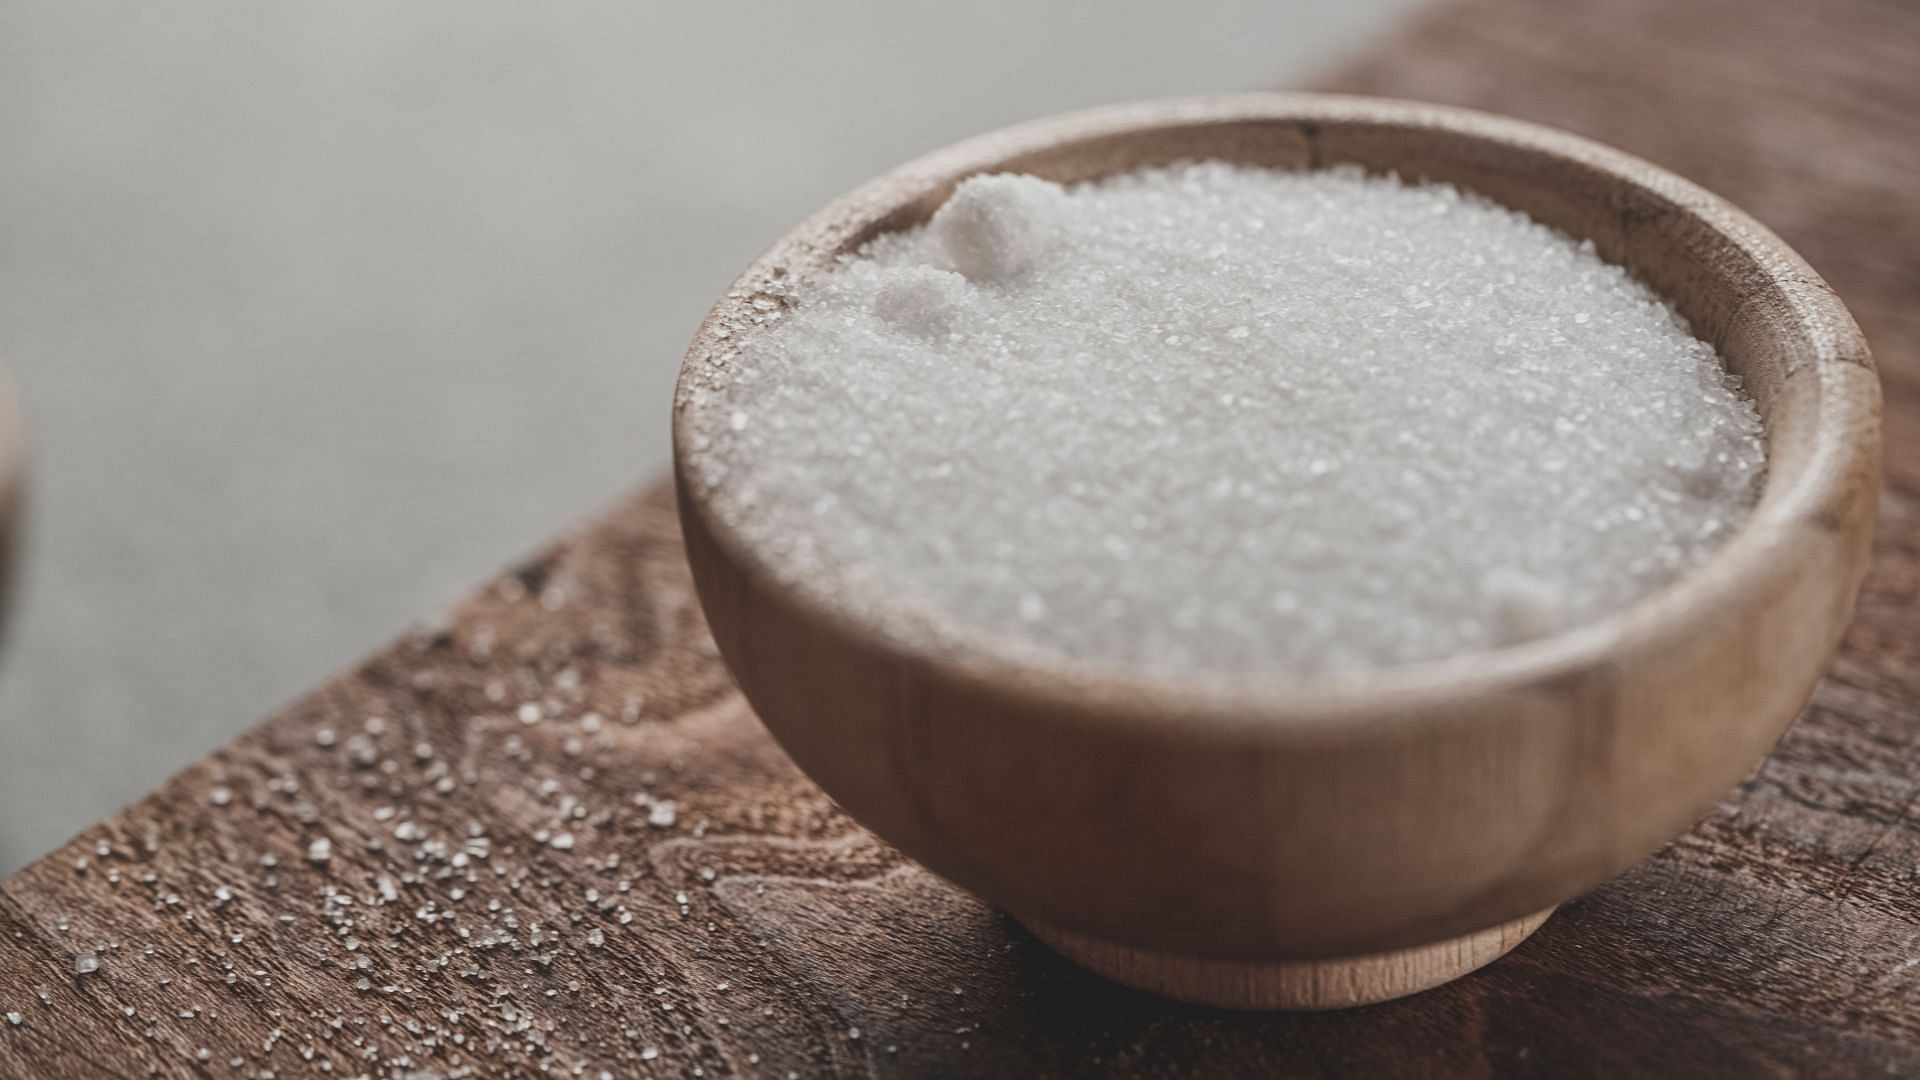 Refined sugars are completely eliminated during the first phase. (Image via Unsplash/Faran Raufi)